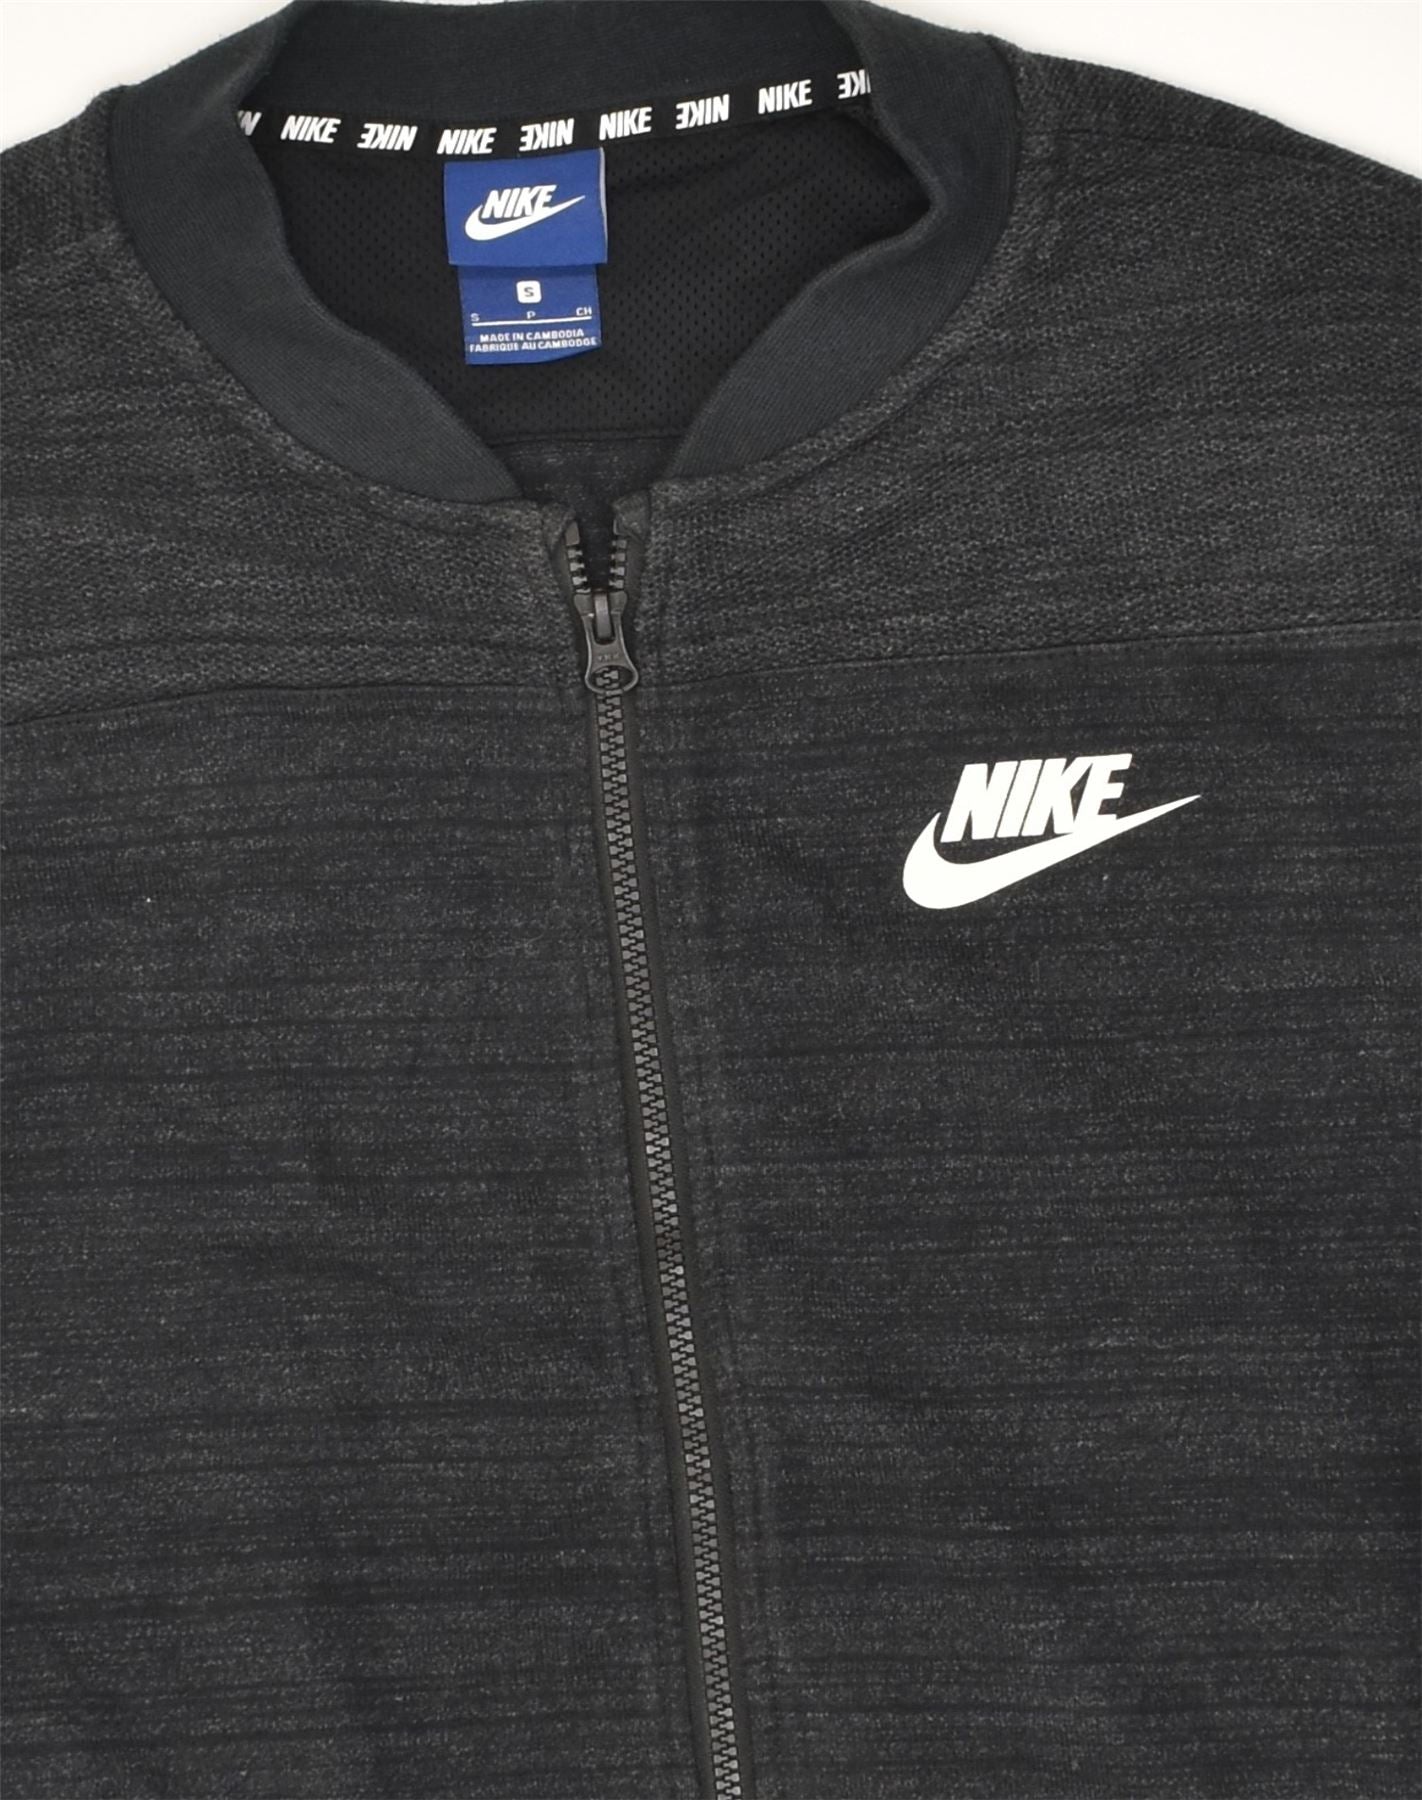 NIKE Mens Tracksuit Top Jacket Small Grey Cotton